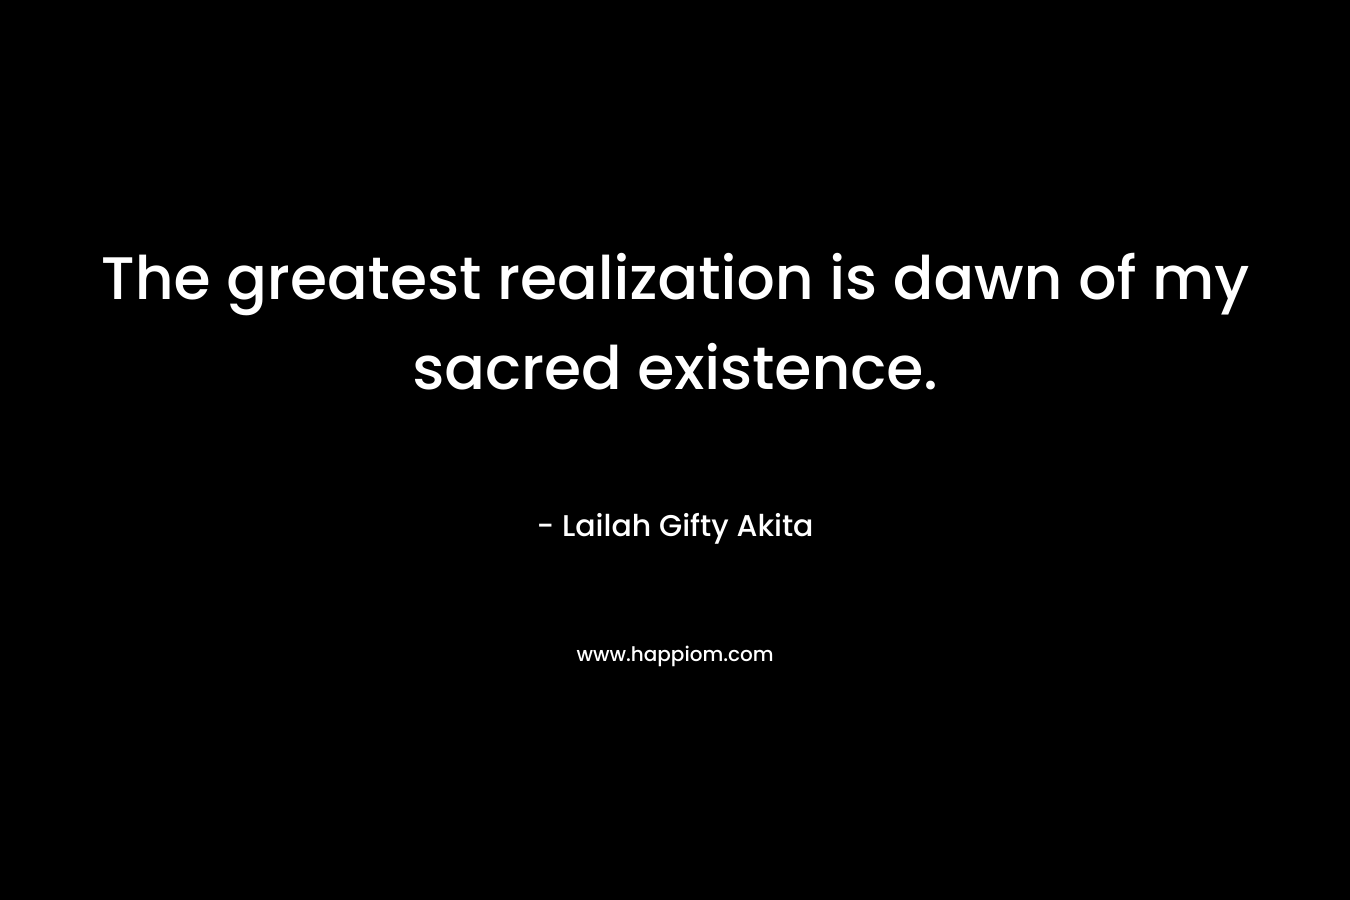 The greatest realization is dawn of my sacred existence. – Lailah Gifty Akita